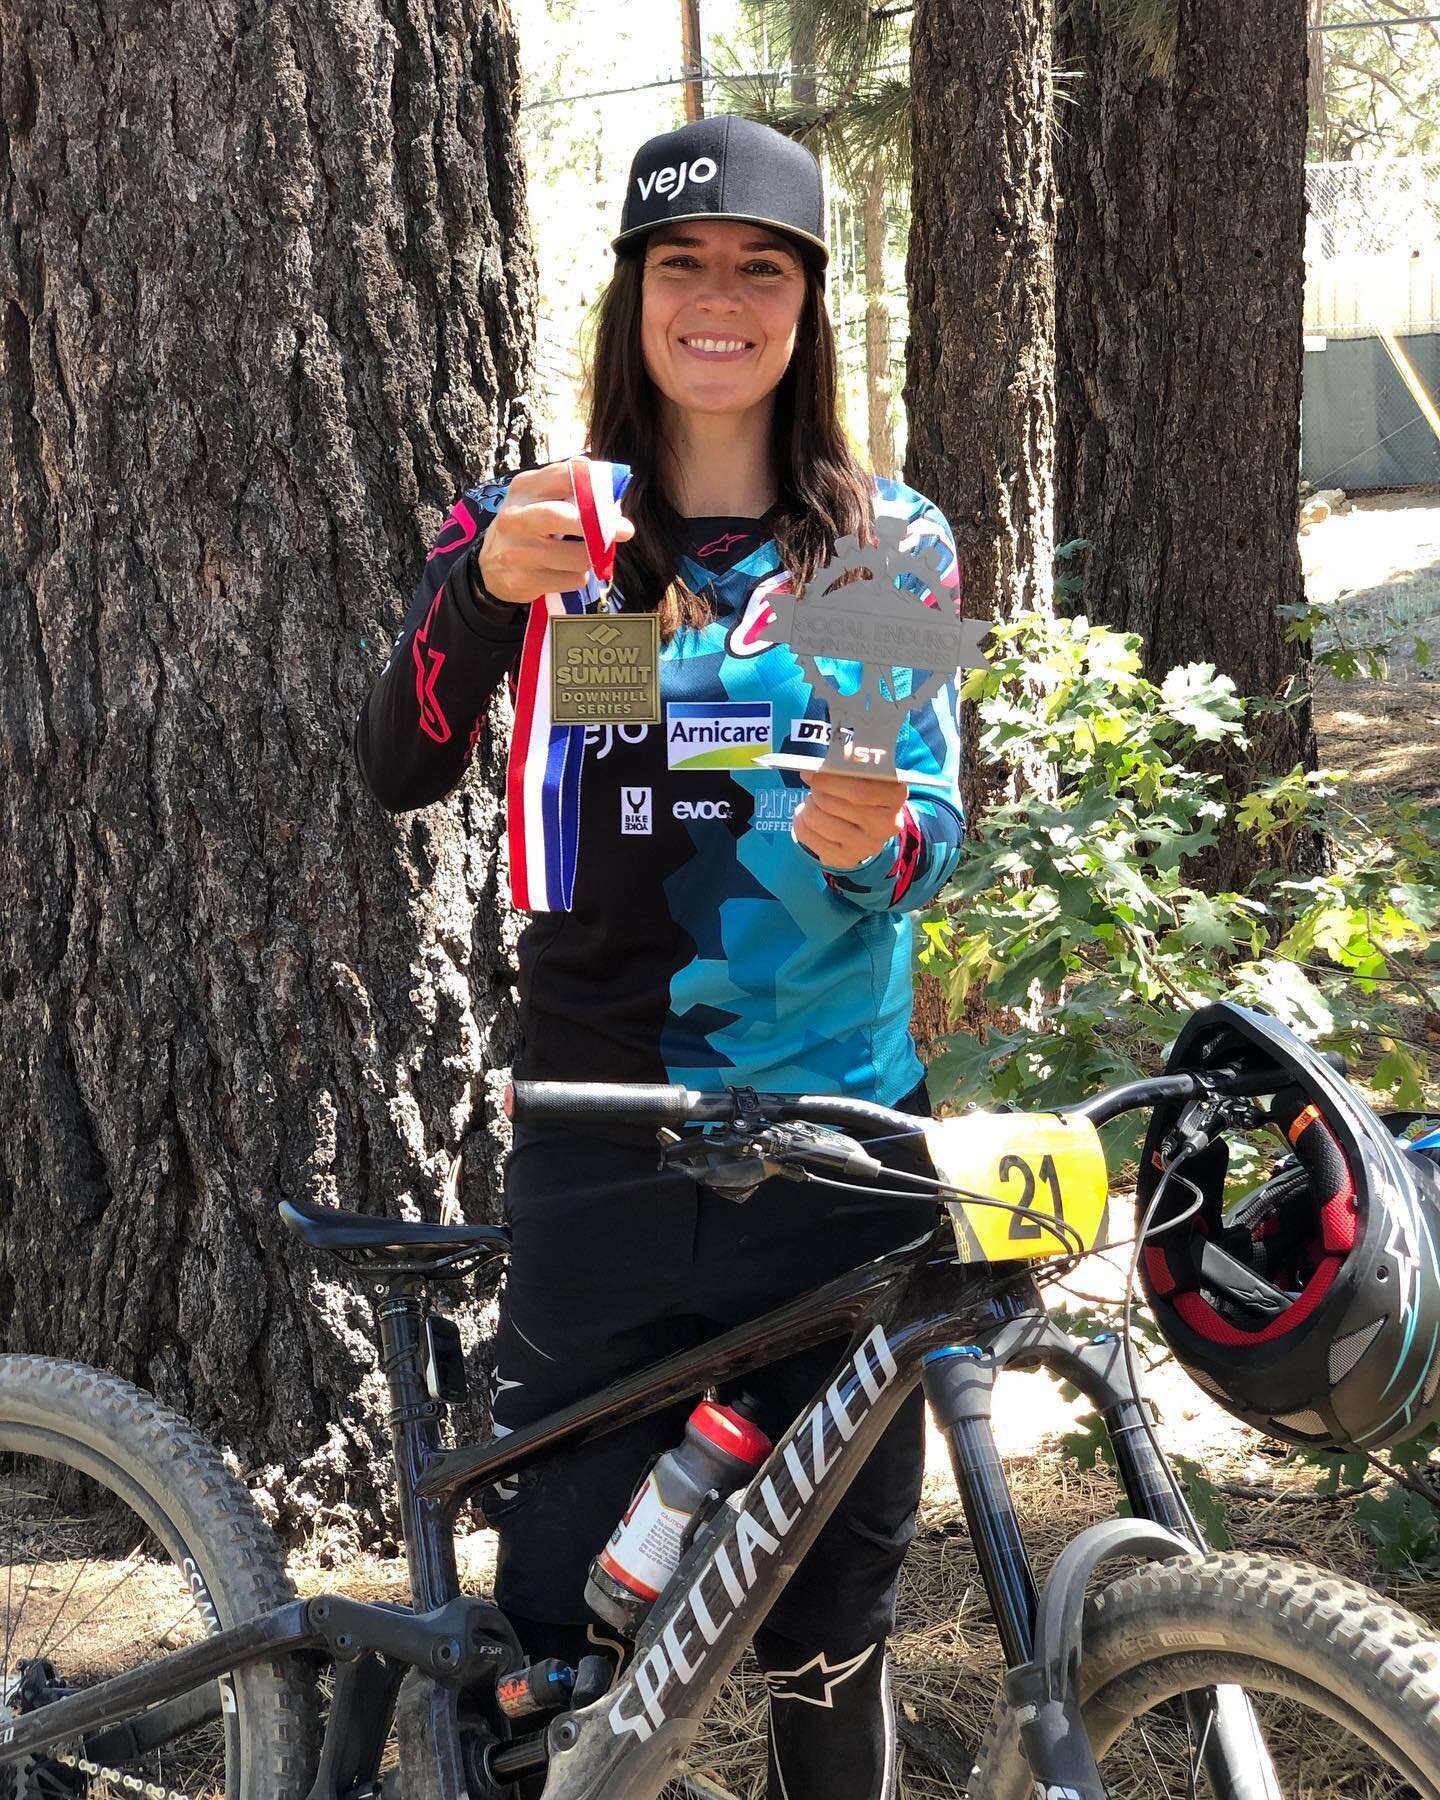 We&rsquo;re back racing!! Yewww 🚀💃🏻🎊 Took the win in the Socal Enduro and the Snow Summit Downhill! It was good to see everyone again and to be back between the tape. Big thanks to @teambigbear.official and @snow_summit for making this possible, 